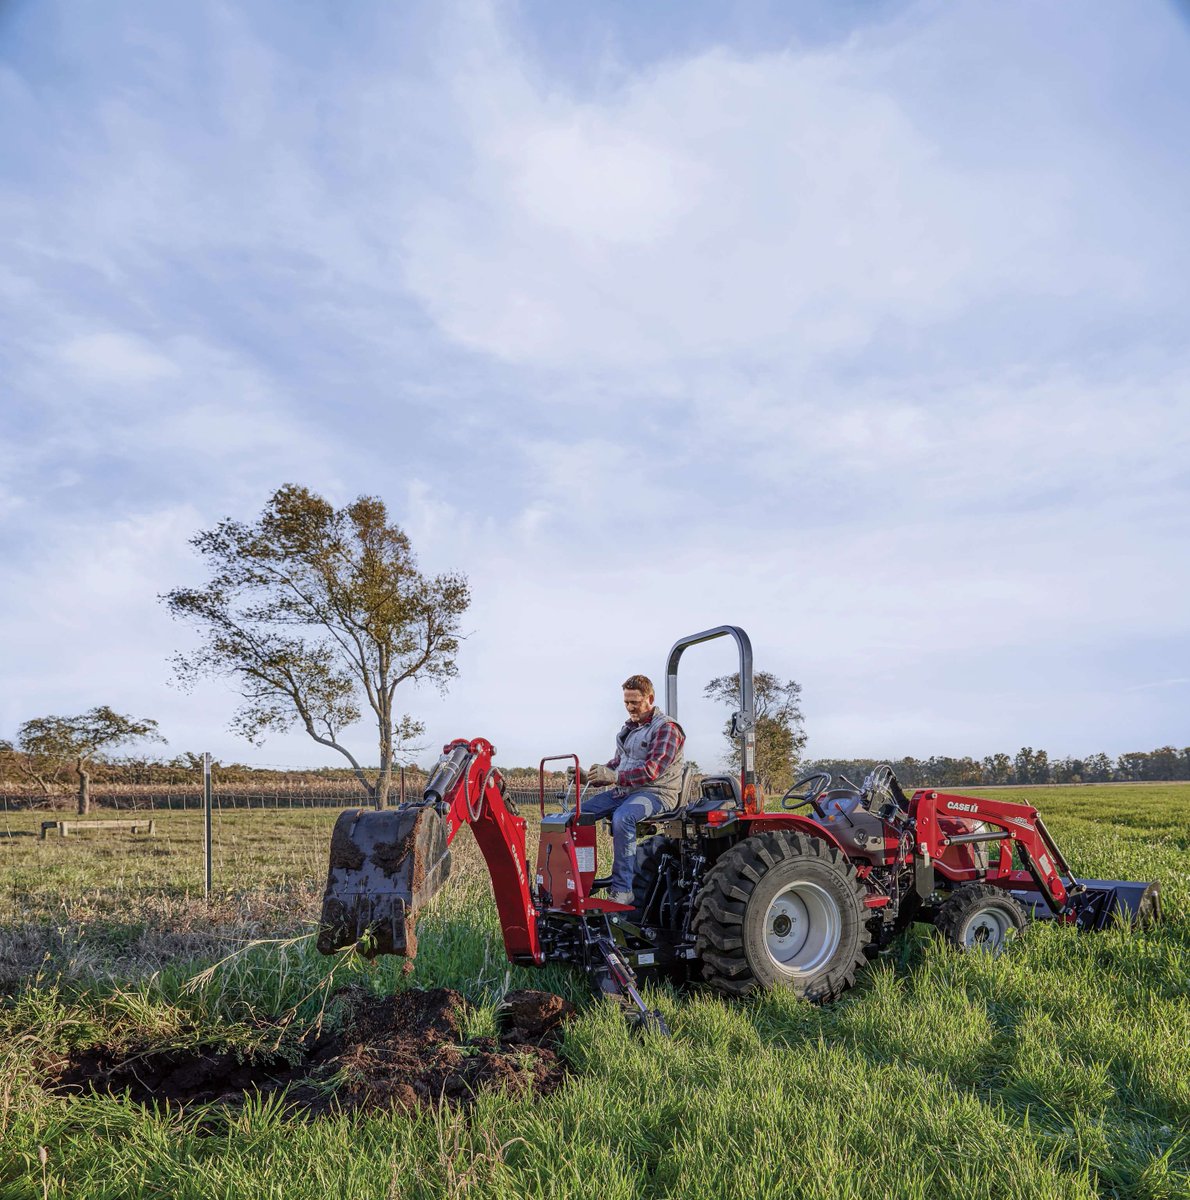 🌾 Case IH: Built By Farmers, masters of compact tractors! From Farmall Compacts to high horsepower, we've got you covered. Contact your local WCEC store today! 💪 #CaseIH #Farmall #CompactTractors #WCEC